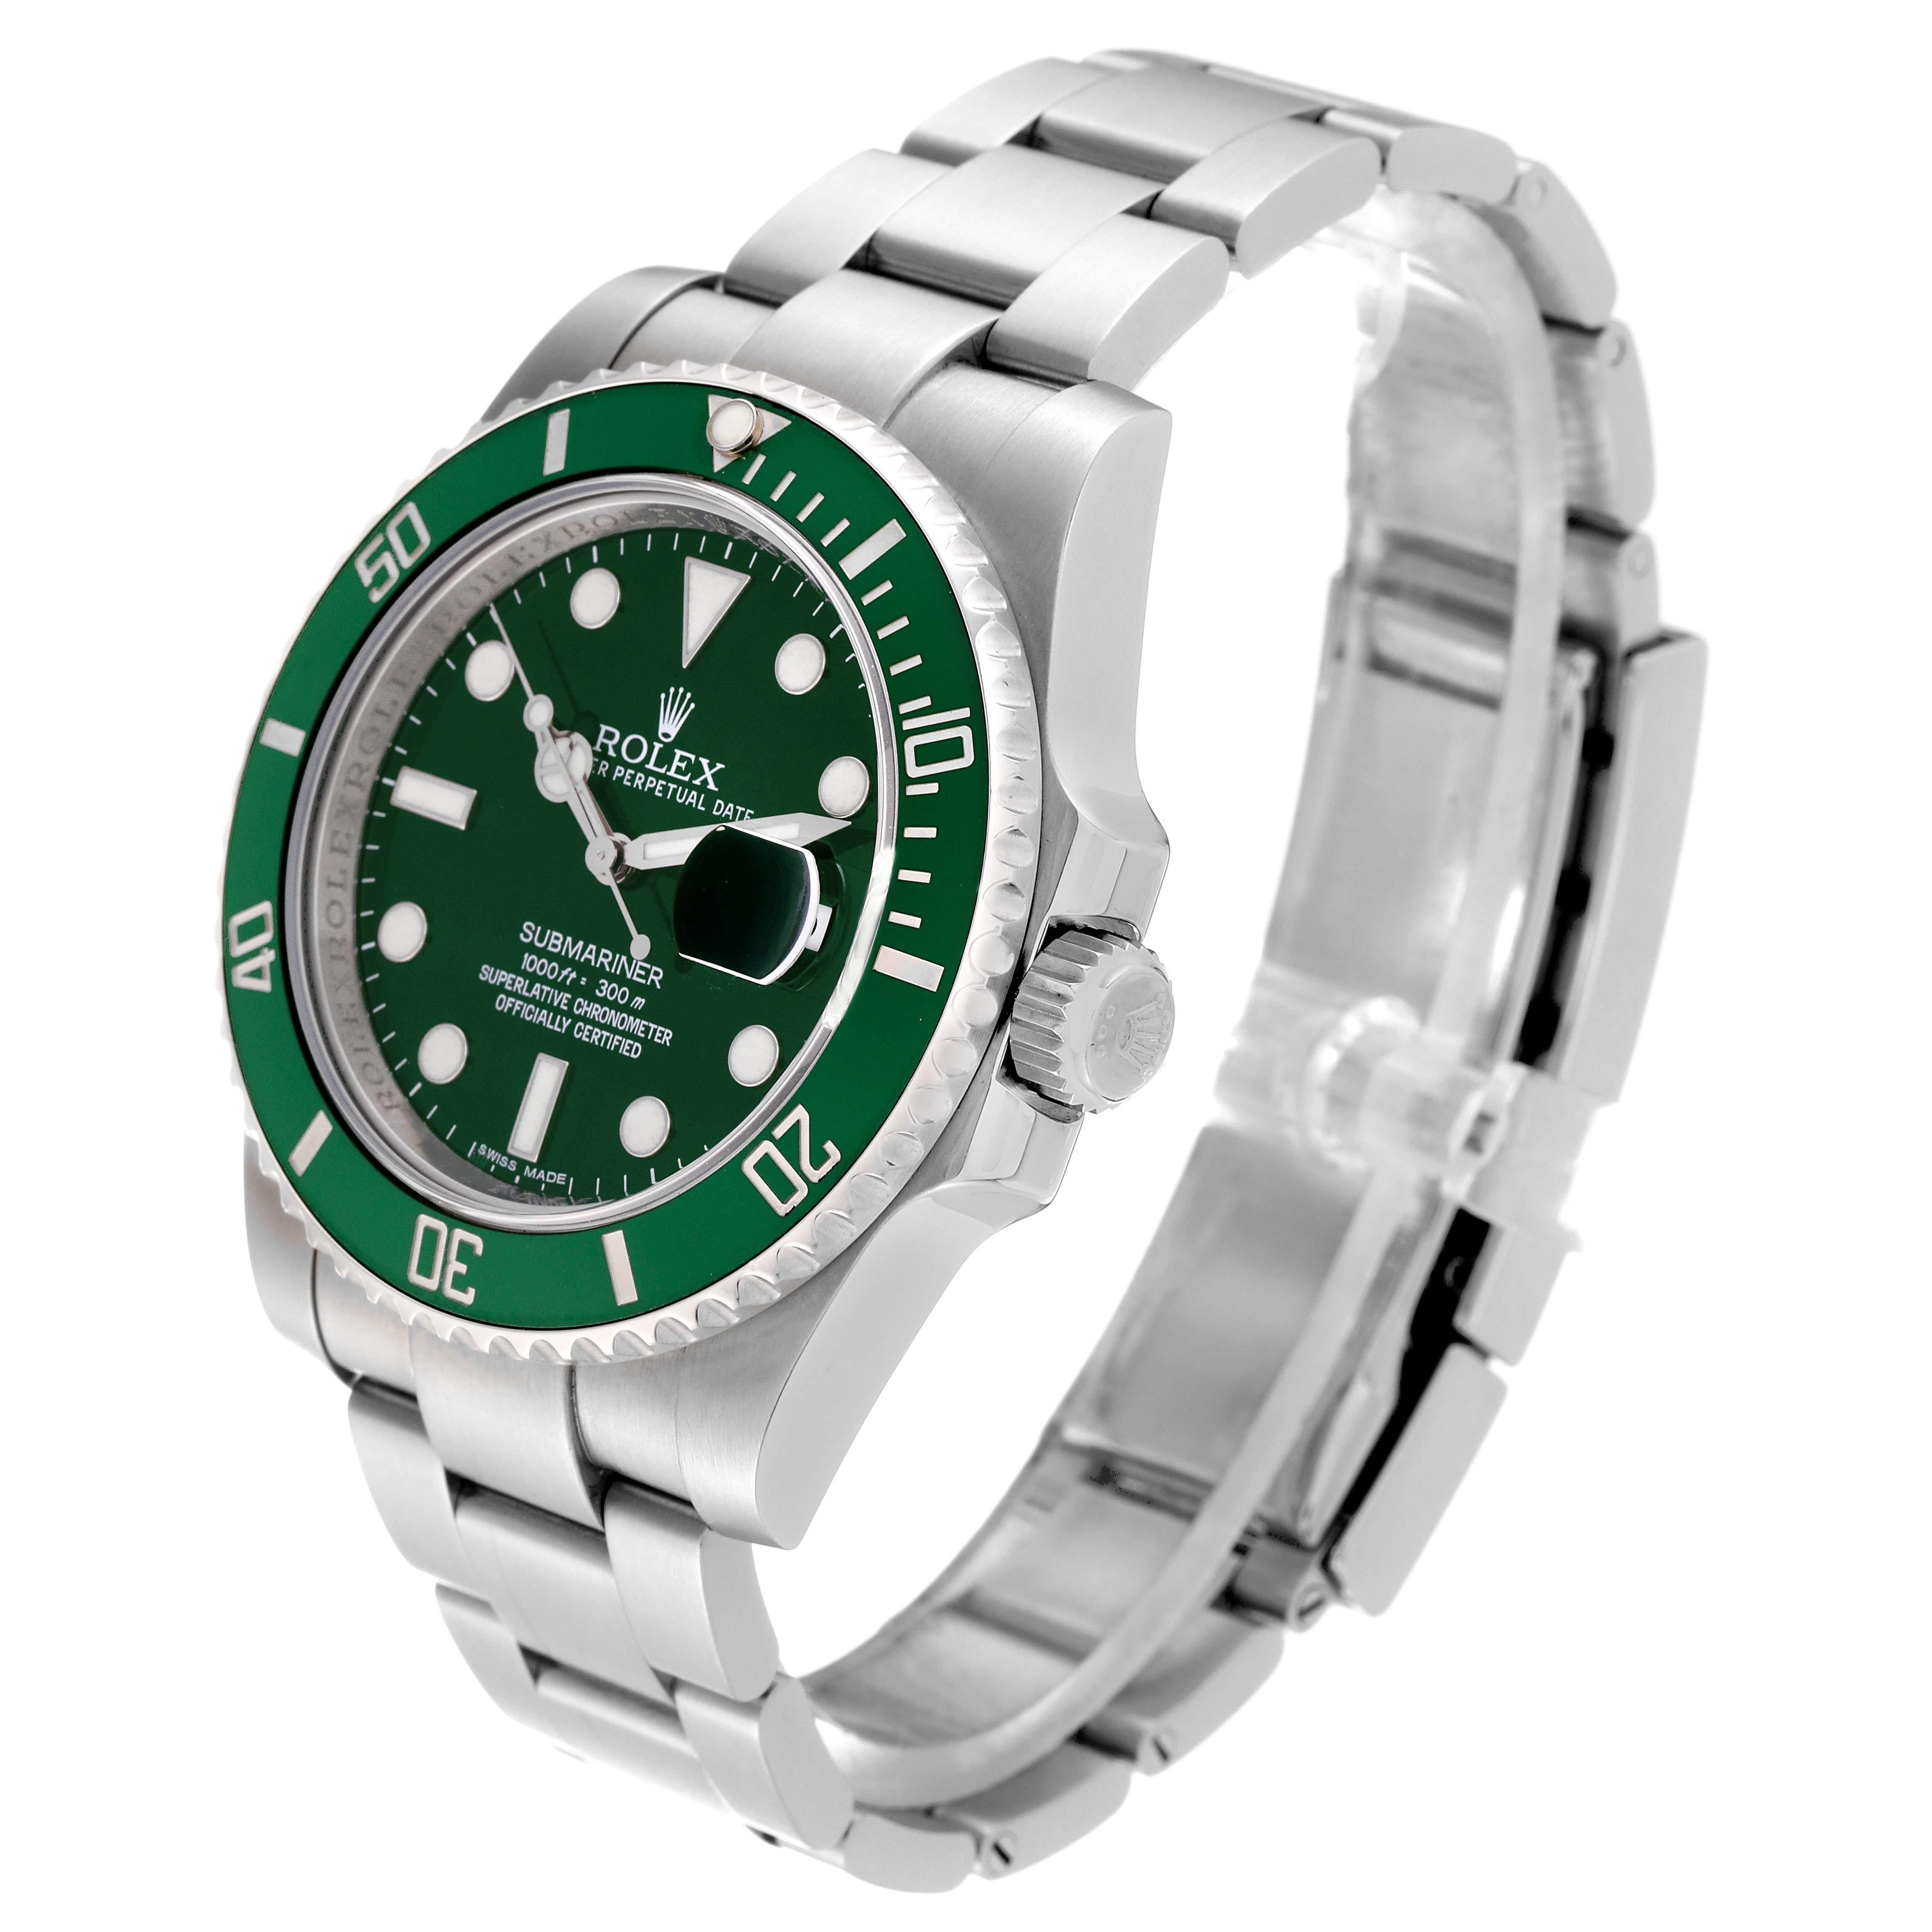 Rolex Submariner Hulk Green Dial Steel Mens Watch 116610LV Card For Sale 7